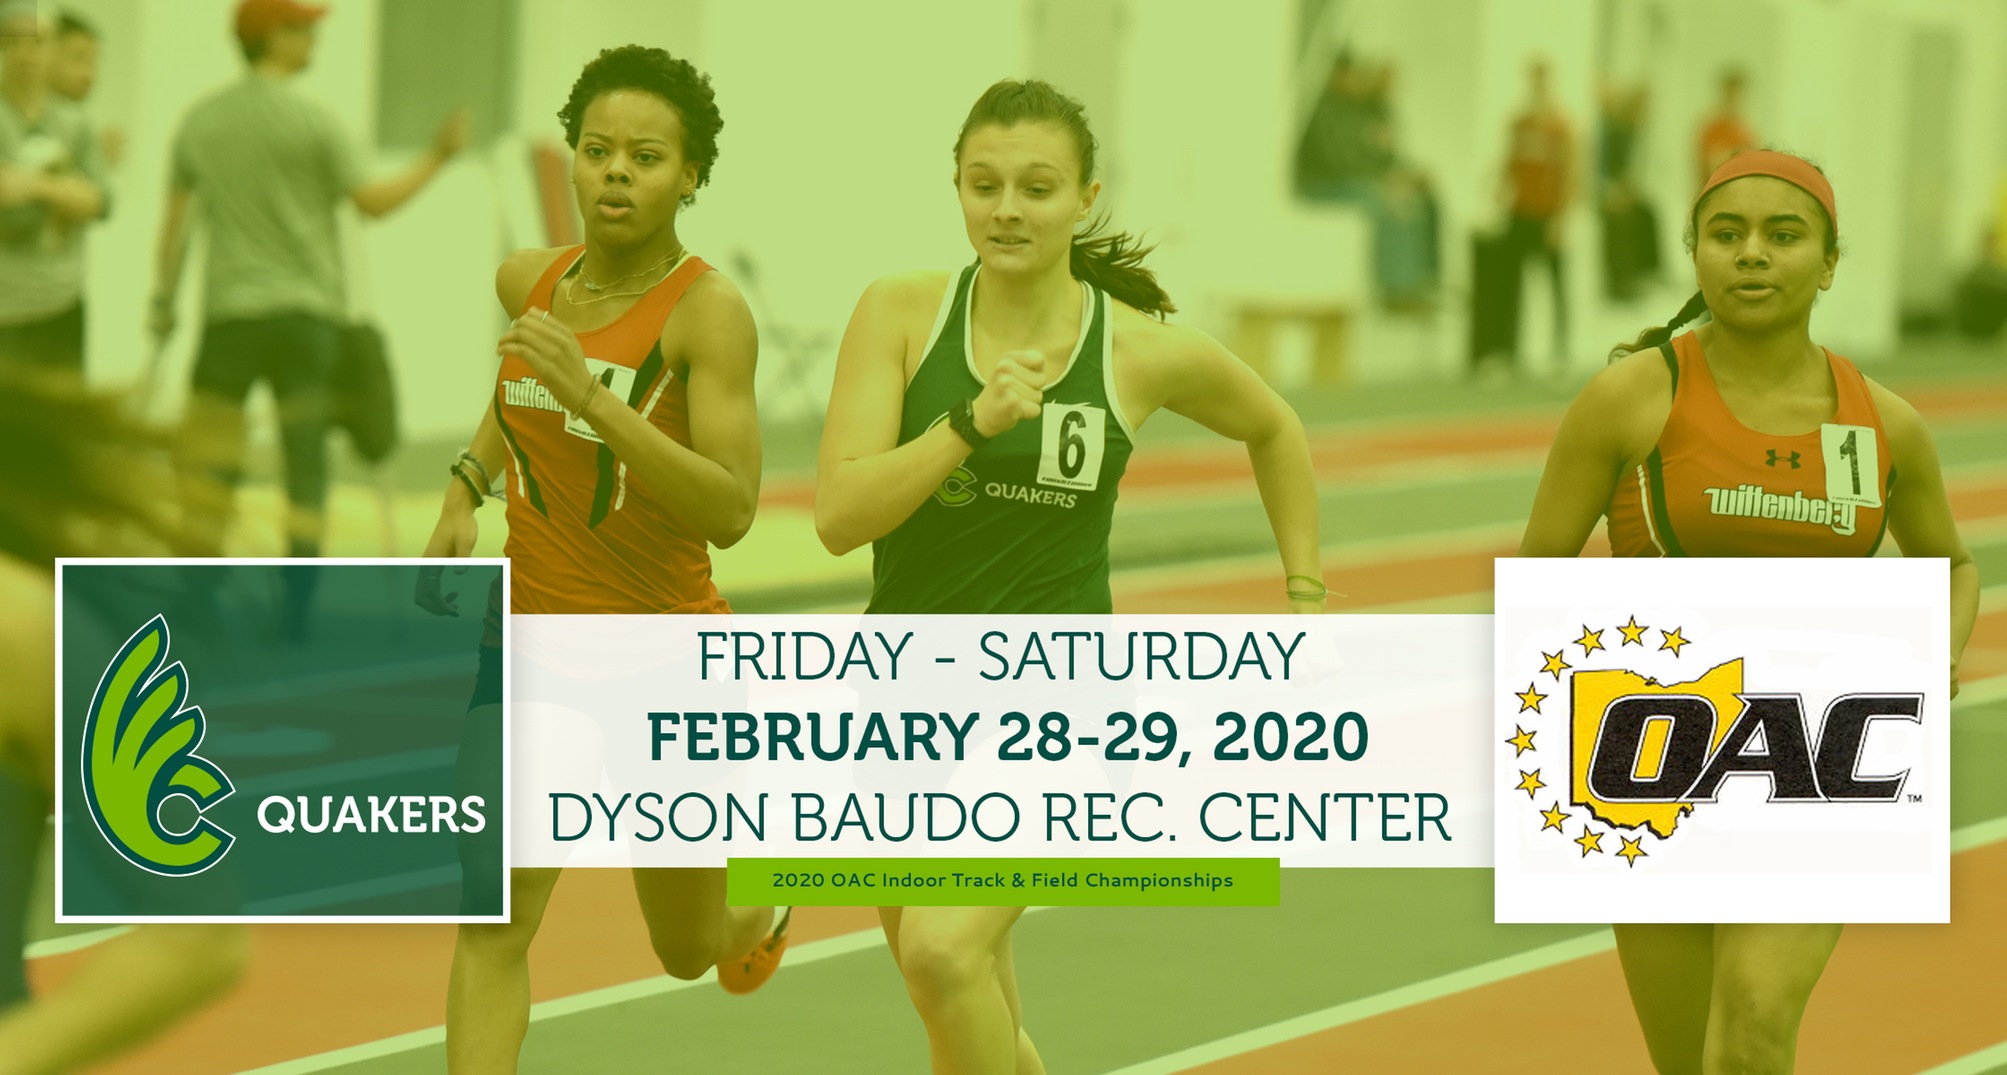 Women's Track & Field Takes to Marietta for OAC Indoor Championships This Weekend